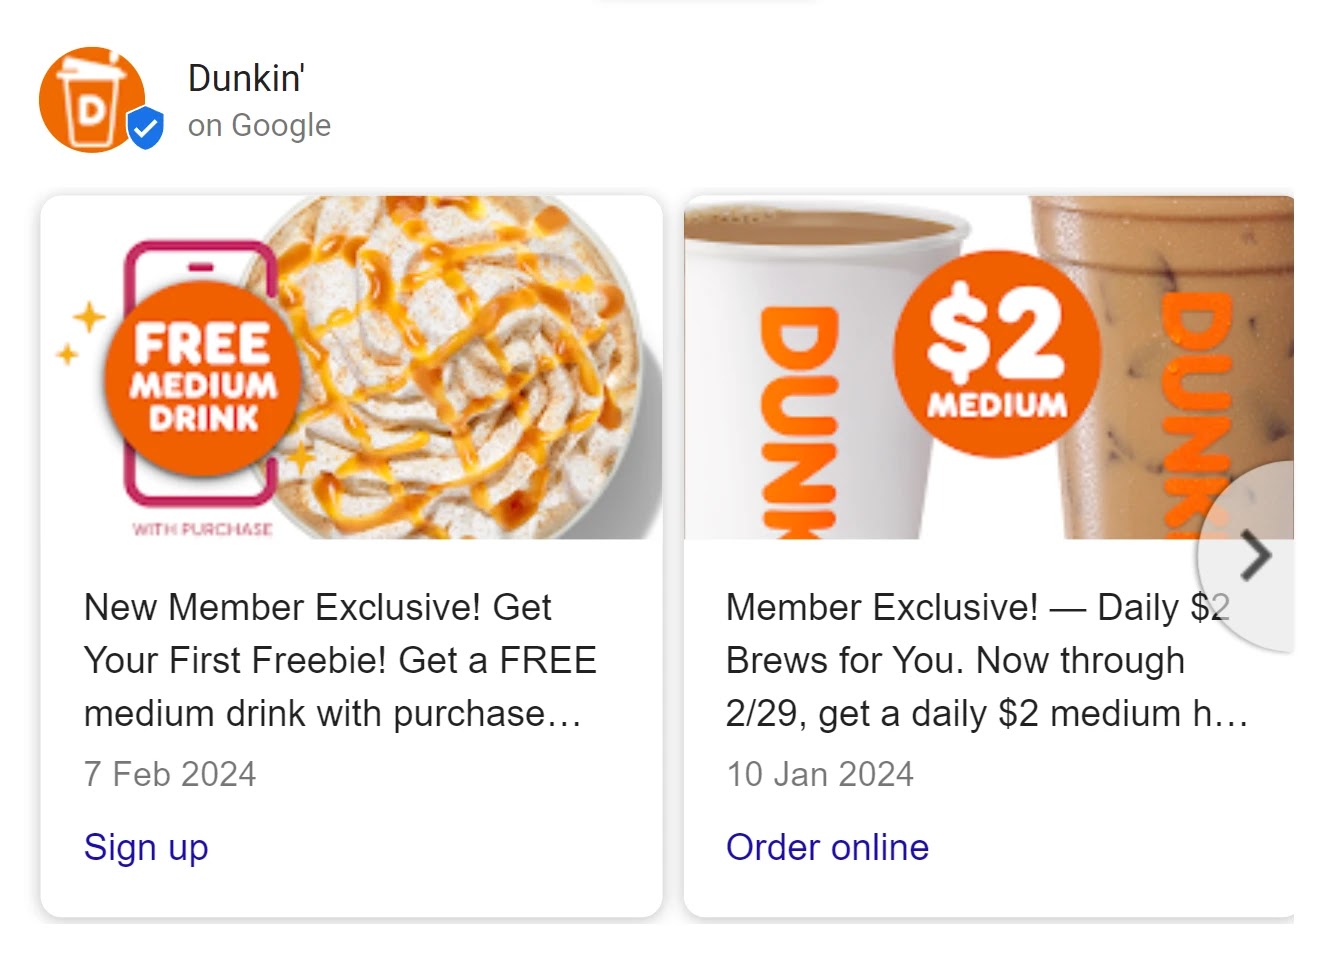 Posts on Google by Dunkin' to highlight deals for customers.